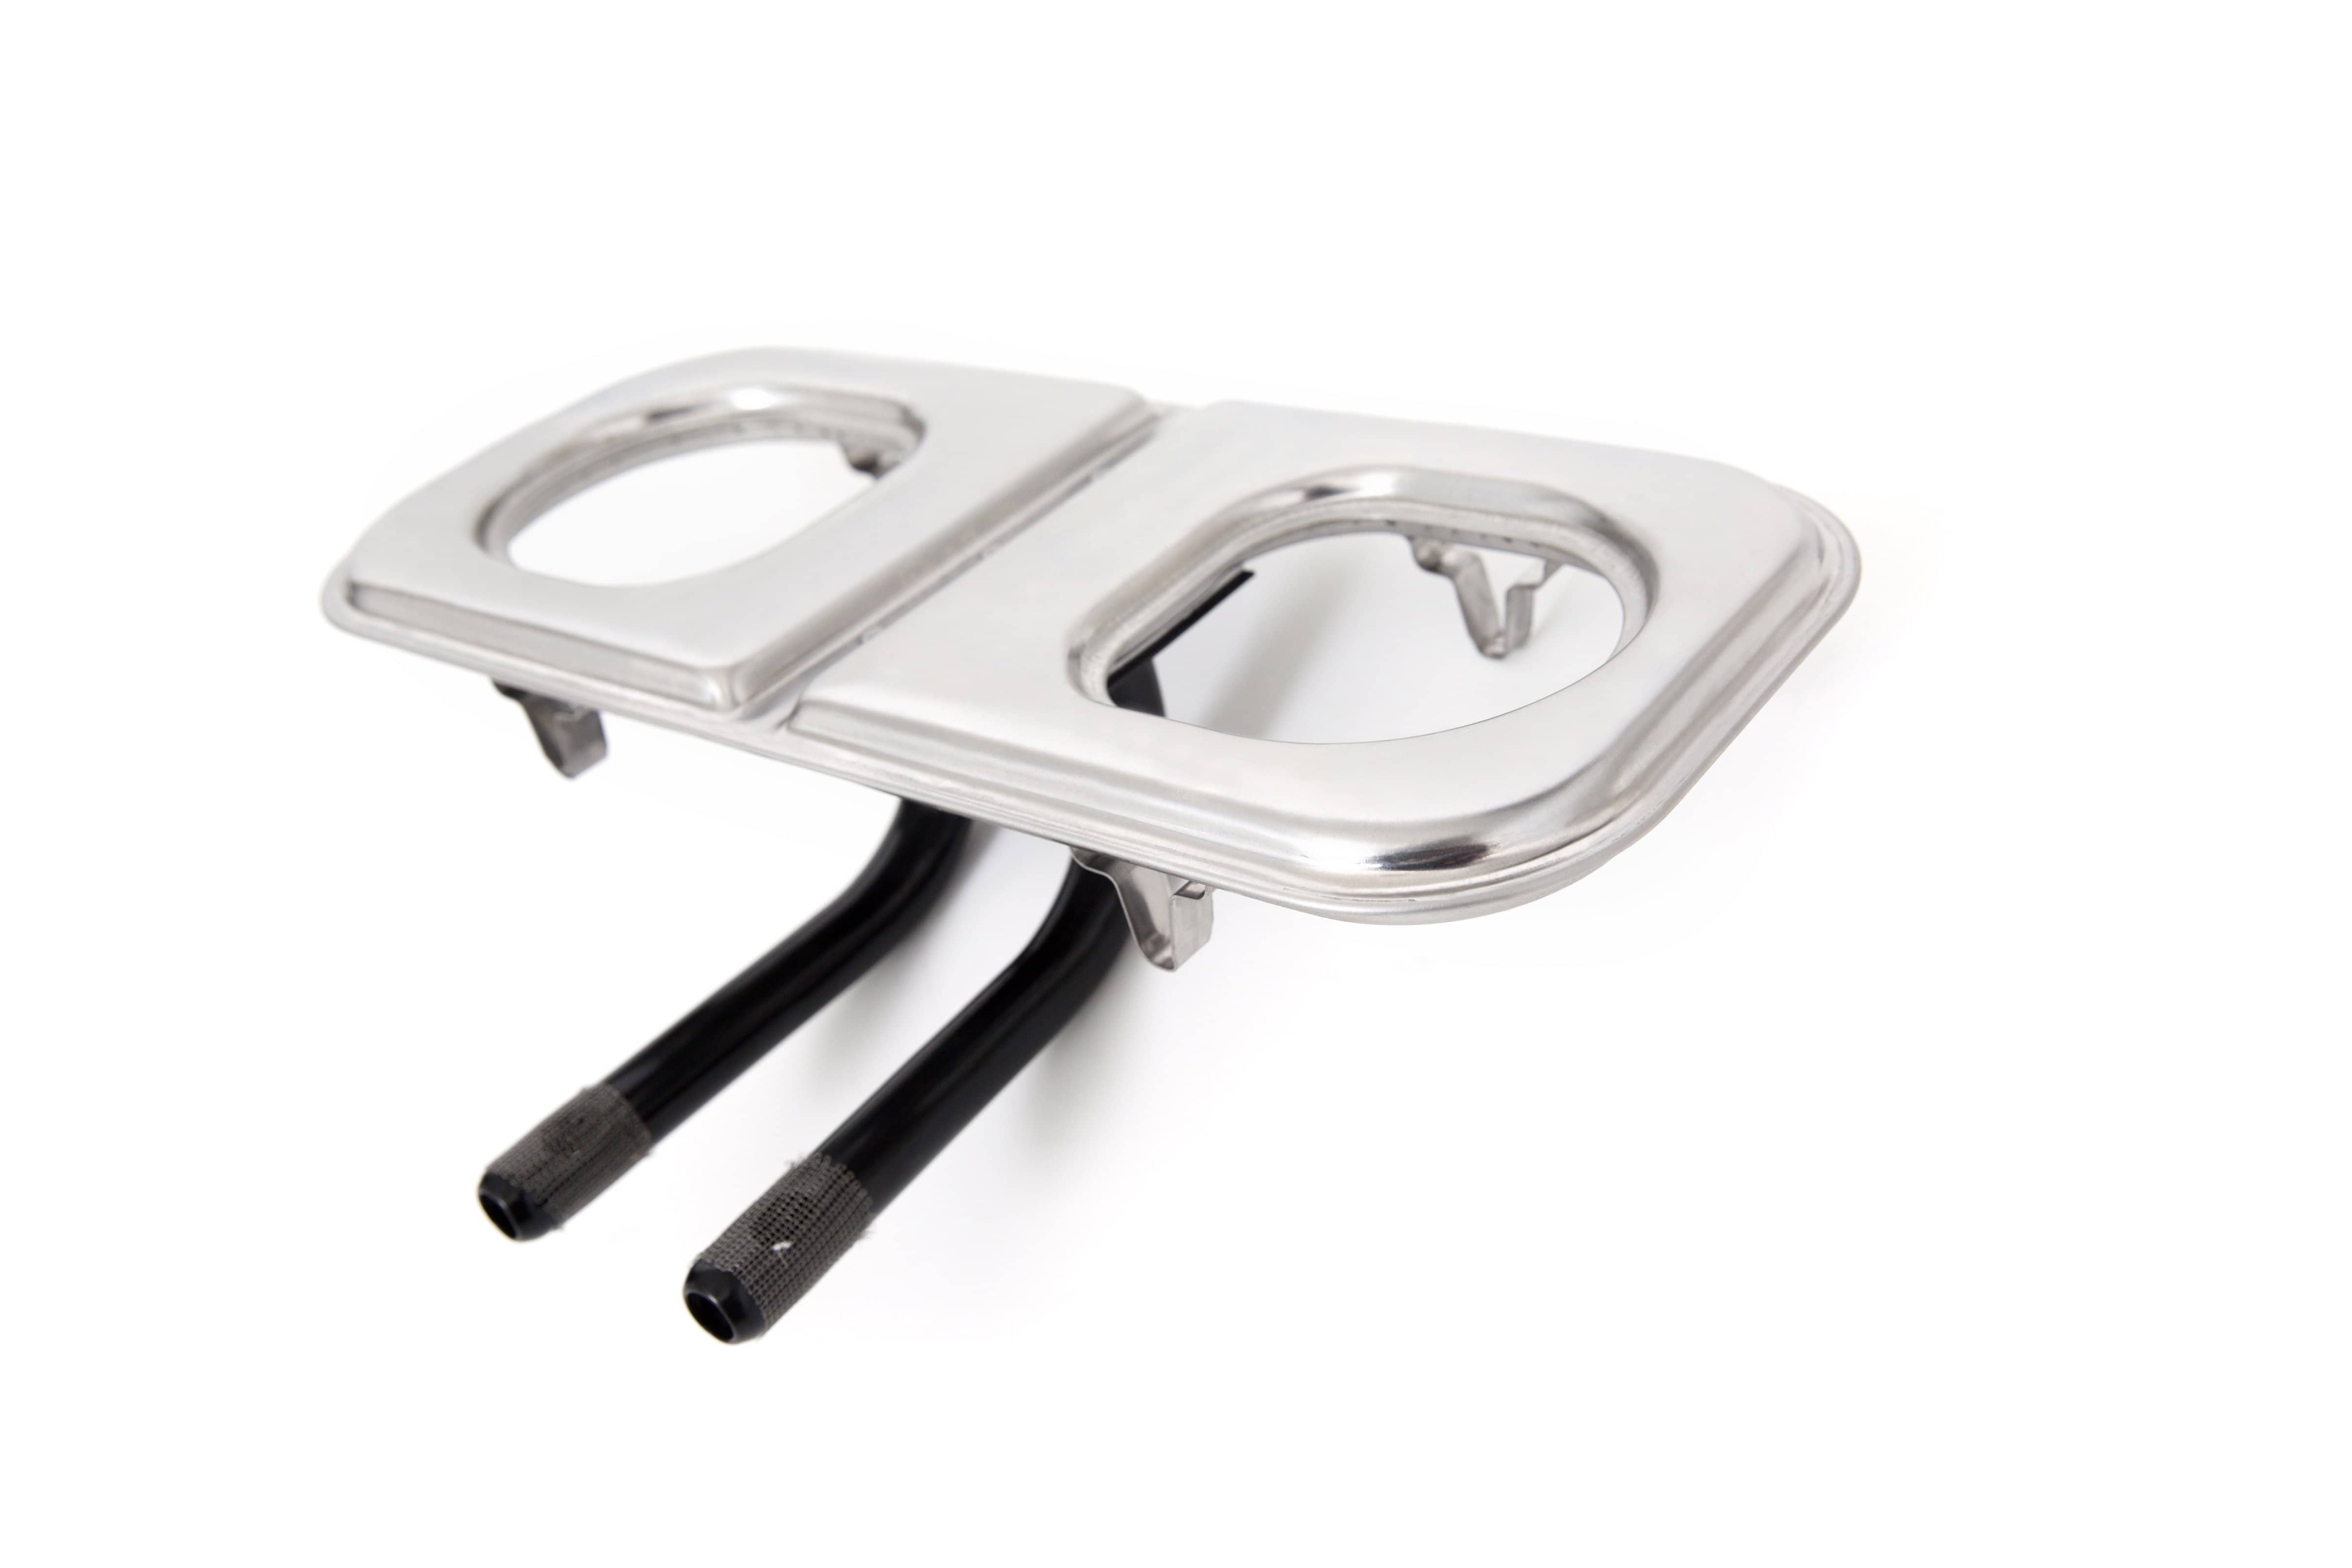 Broil King Broil King Accessories BURNER - INFINITY - T401 - SS